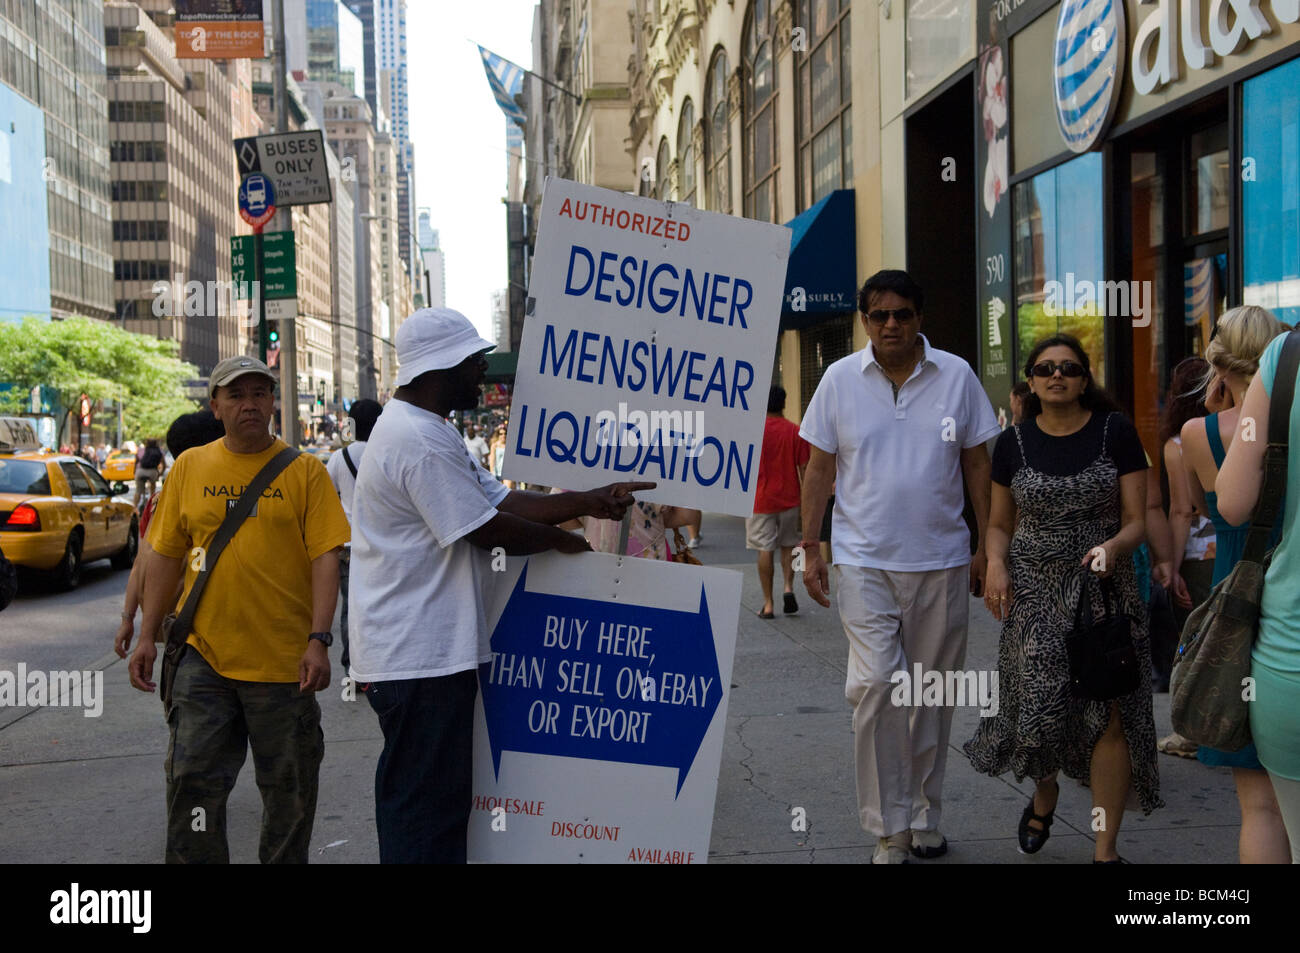 A worker holds up a sign advertising a mens ware liquidation sale in midtown in New York Stock Photo